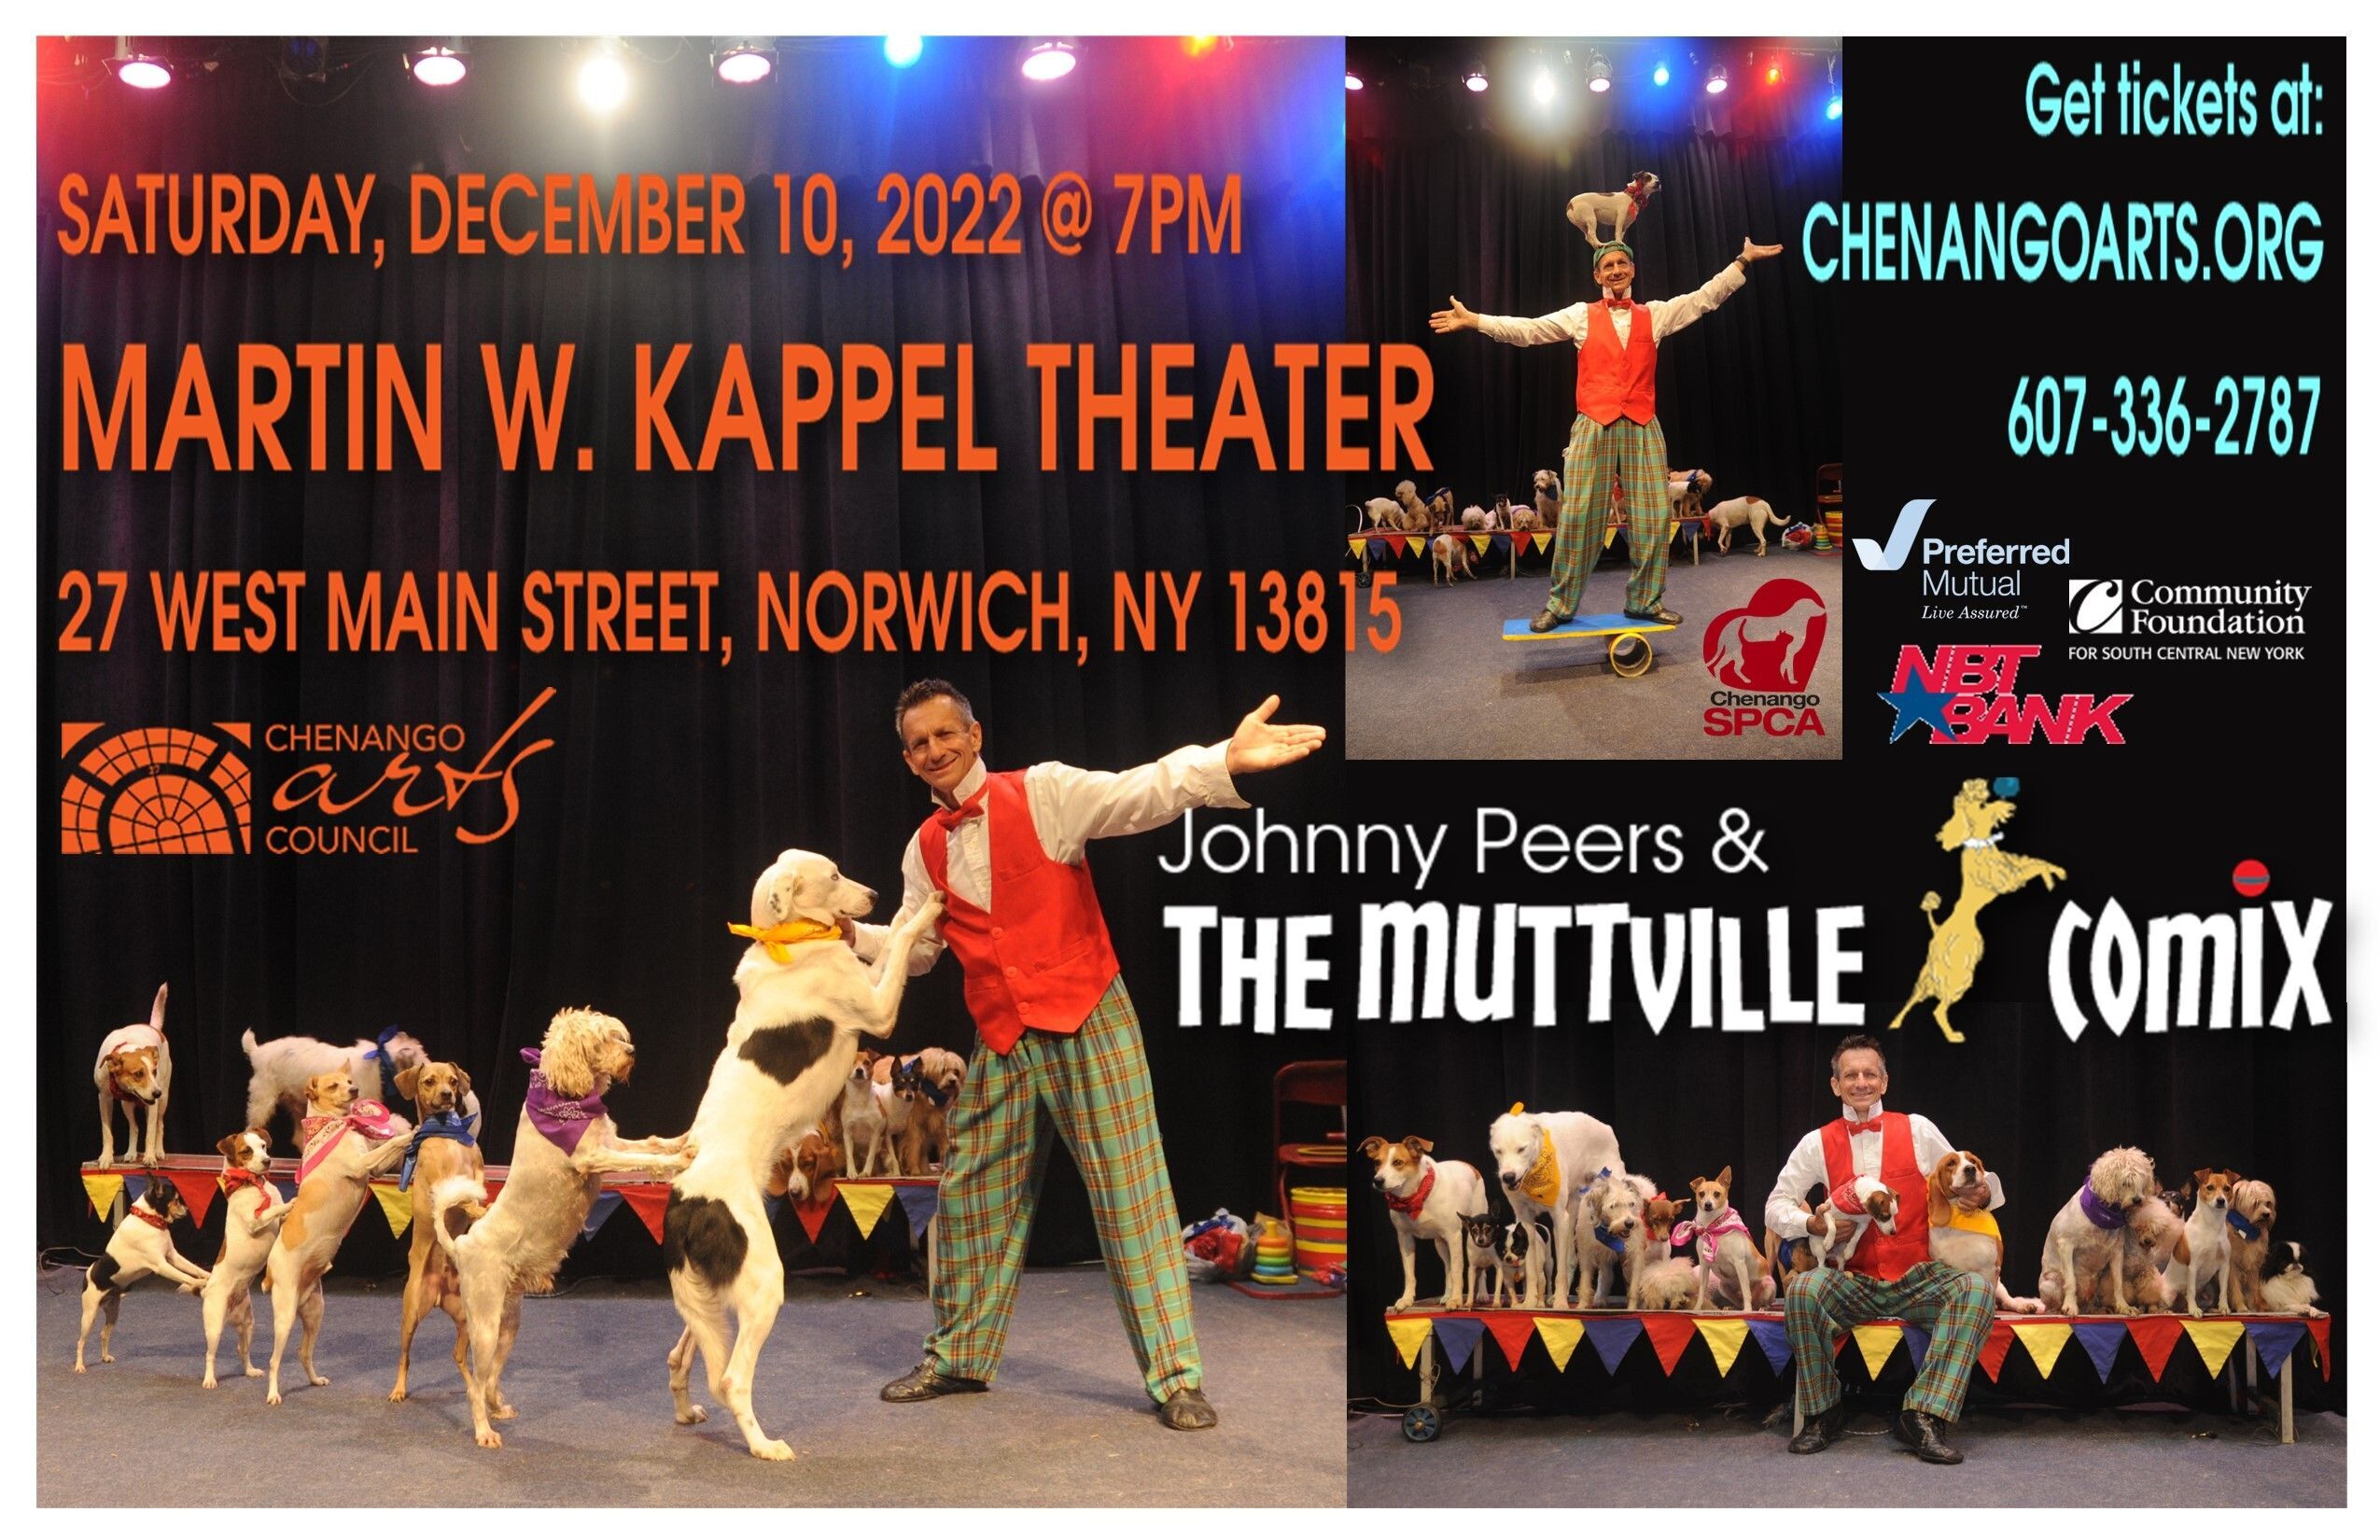 Johnny Peers & The Mutville Comix